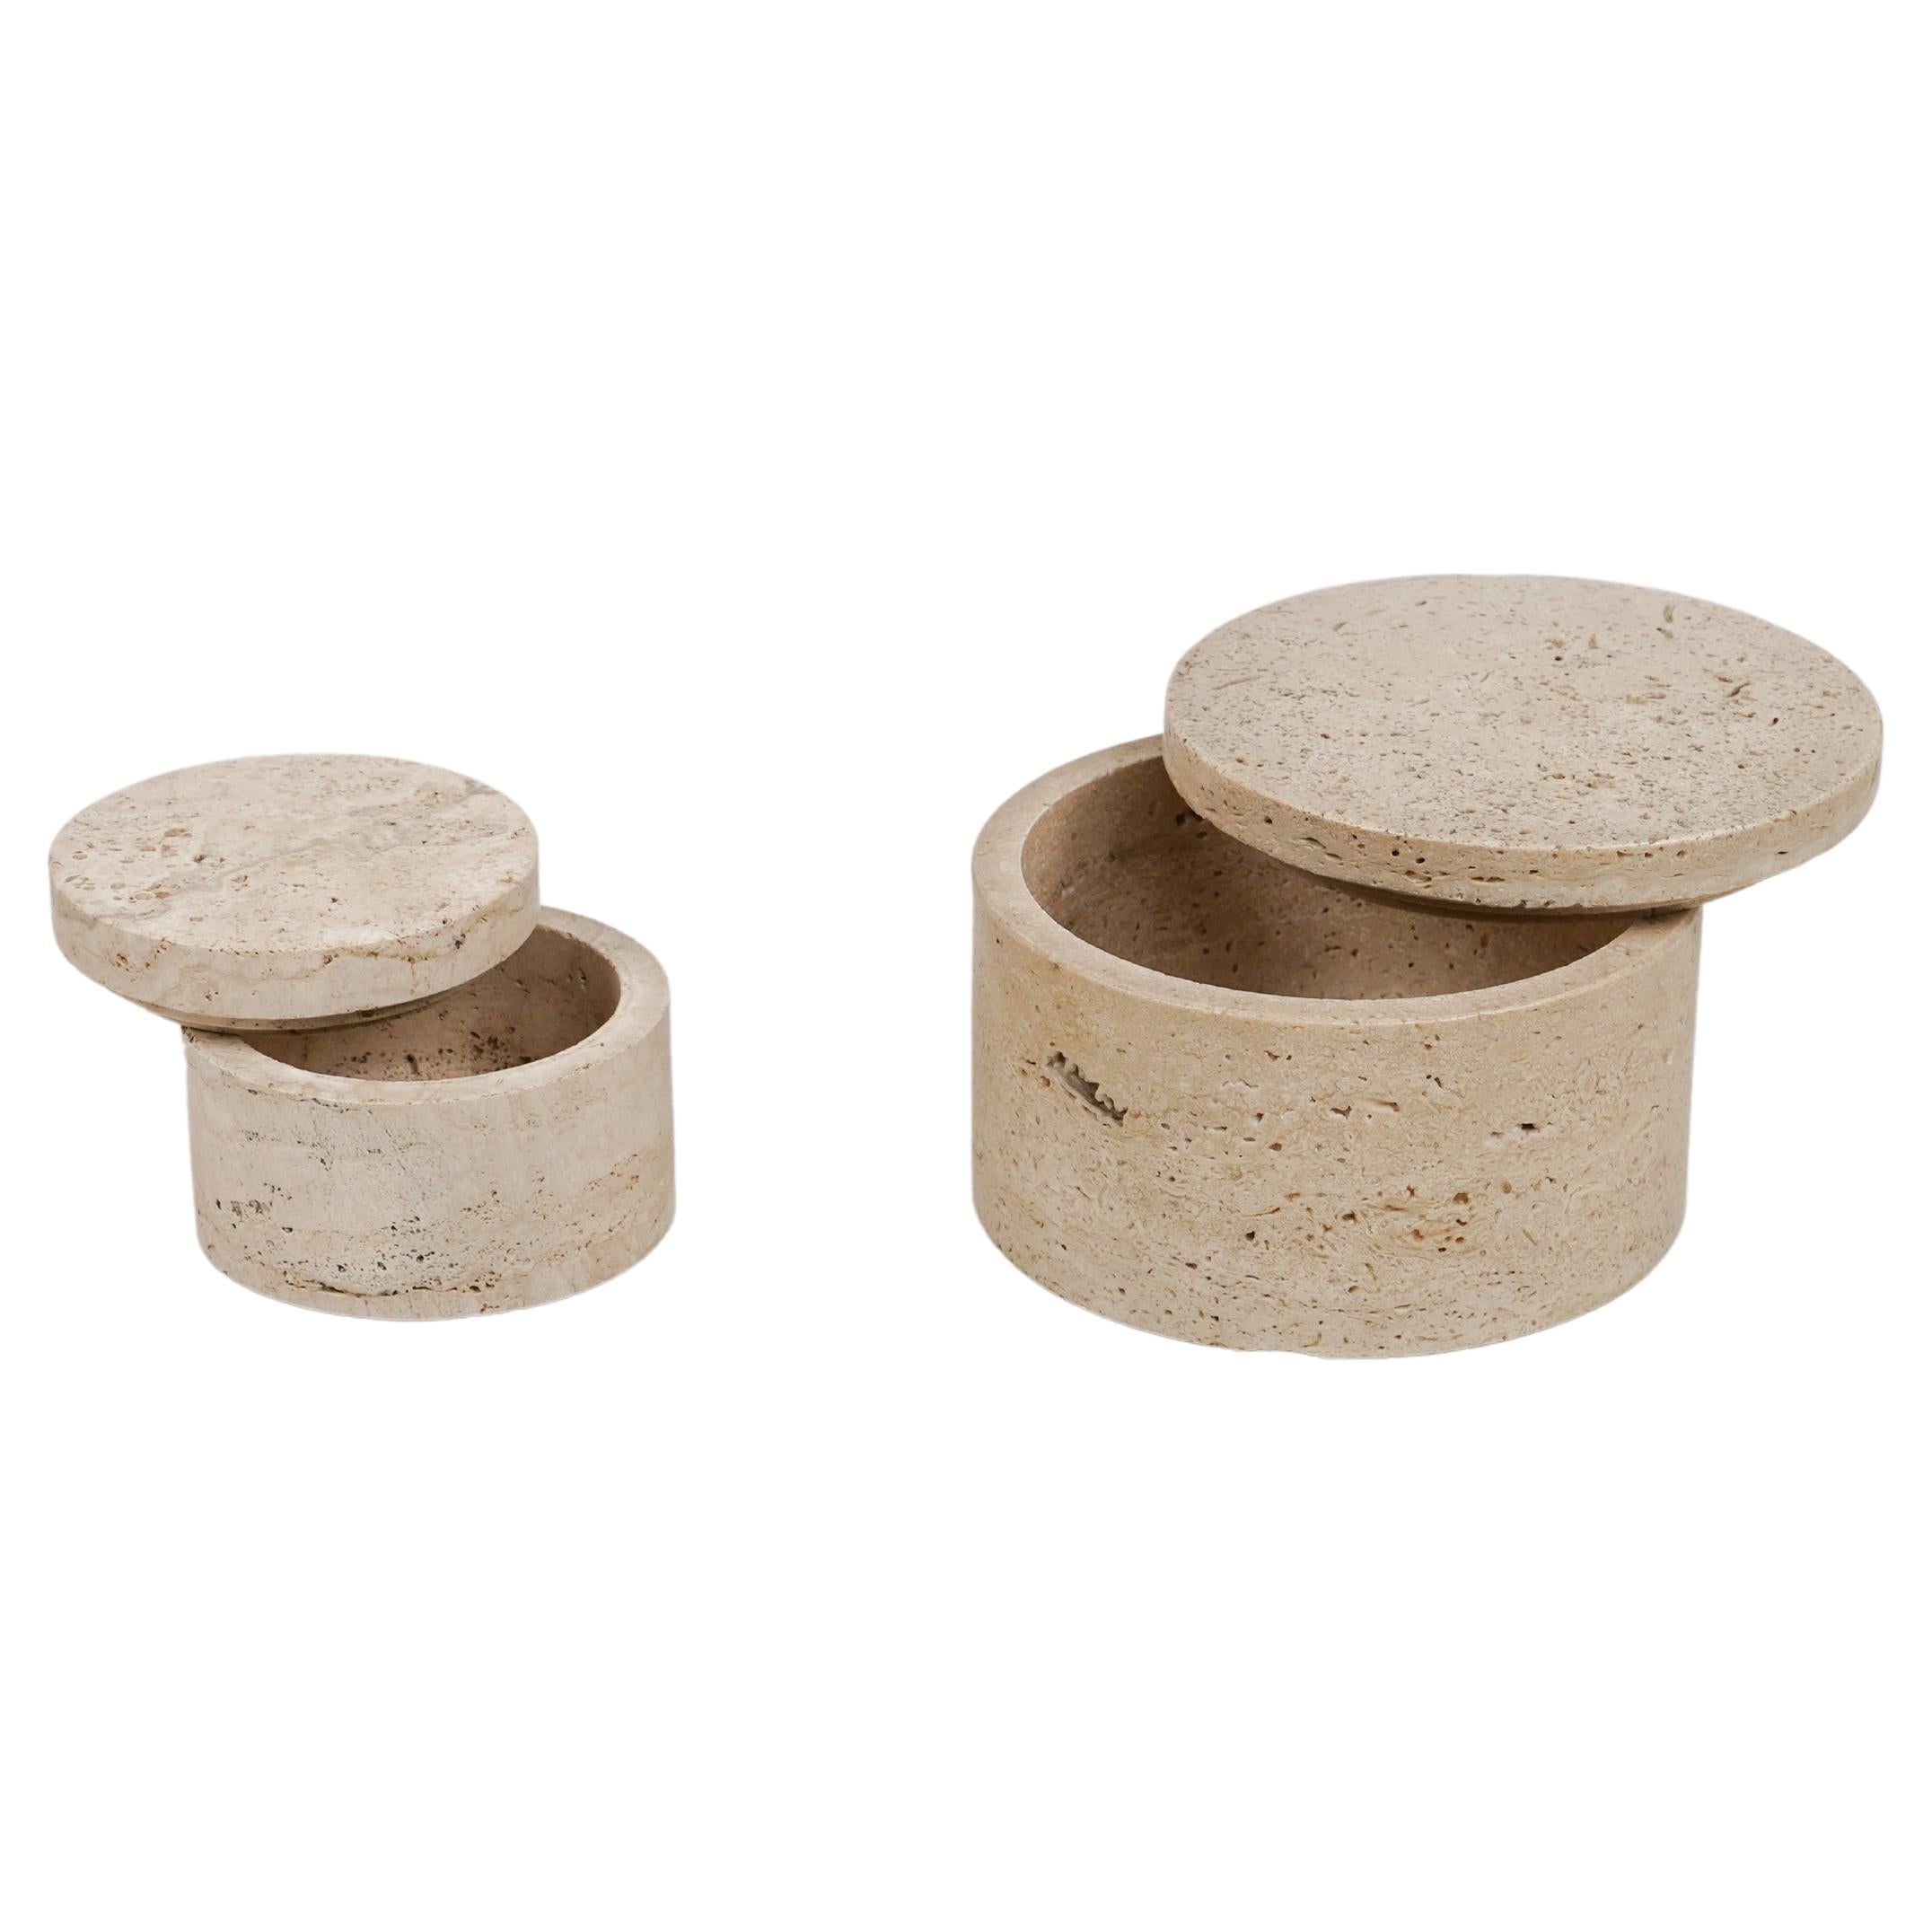 Midcentury pair of cylindrical decorative box in travertine in the style of Enzo Mari.

Made in Italy in the 1970s.

Large box: Height  8 cm, Diameter 12.5 cm.
Little box: Height  6 cm, Diameter 8 cm.

Perfect desk object or gift idea.